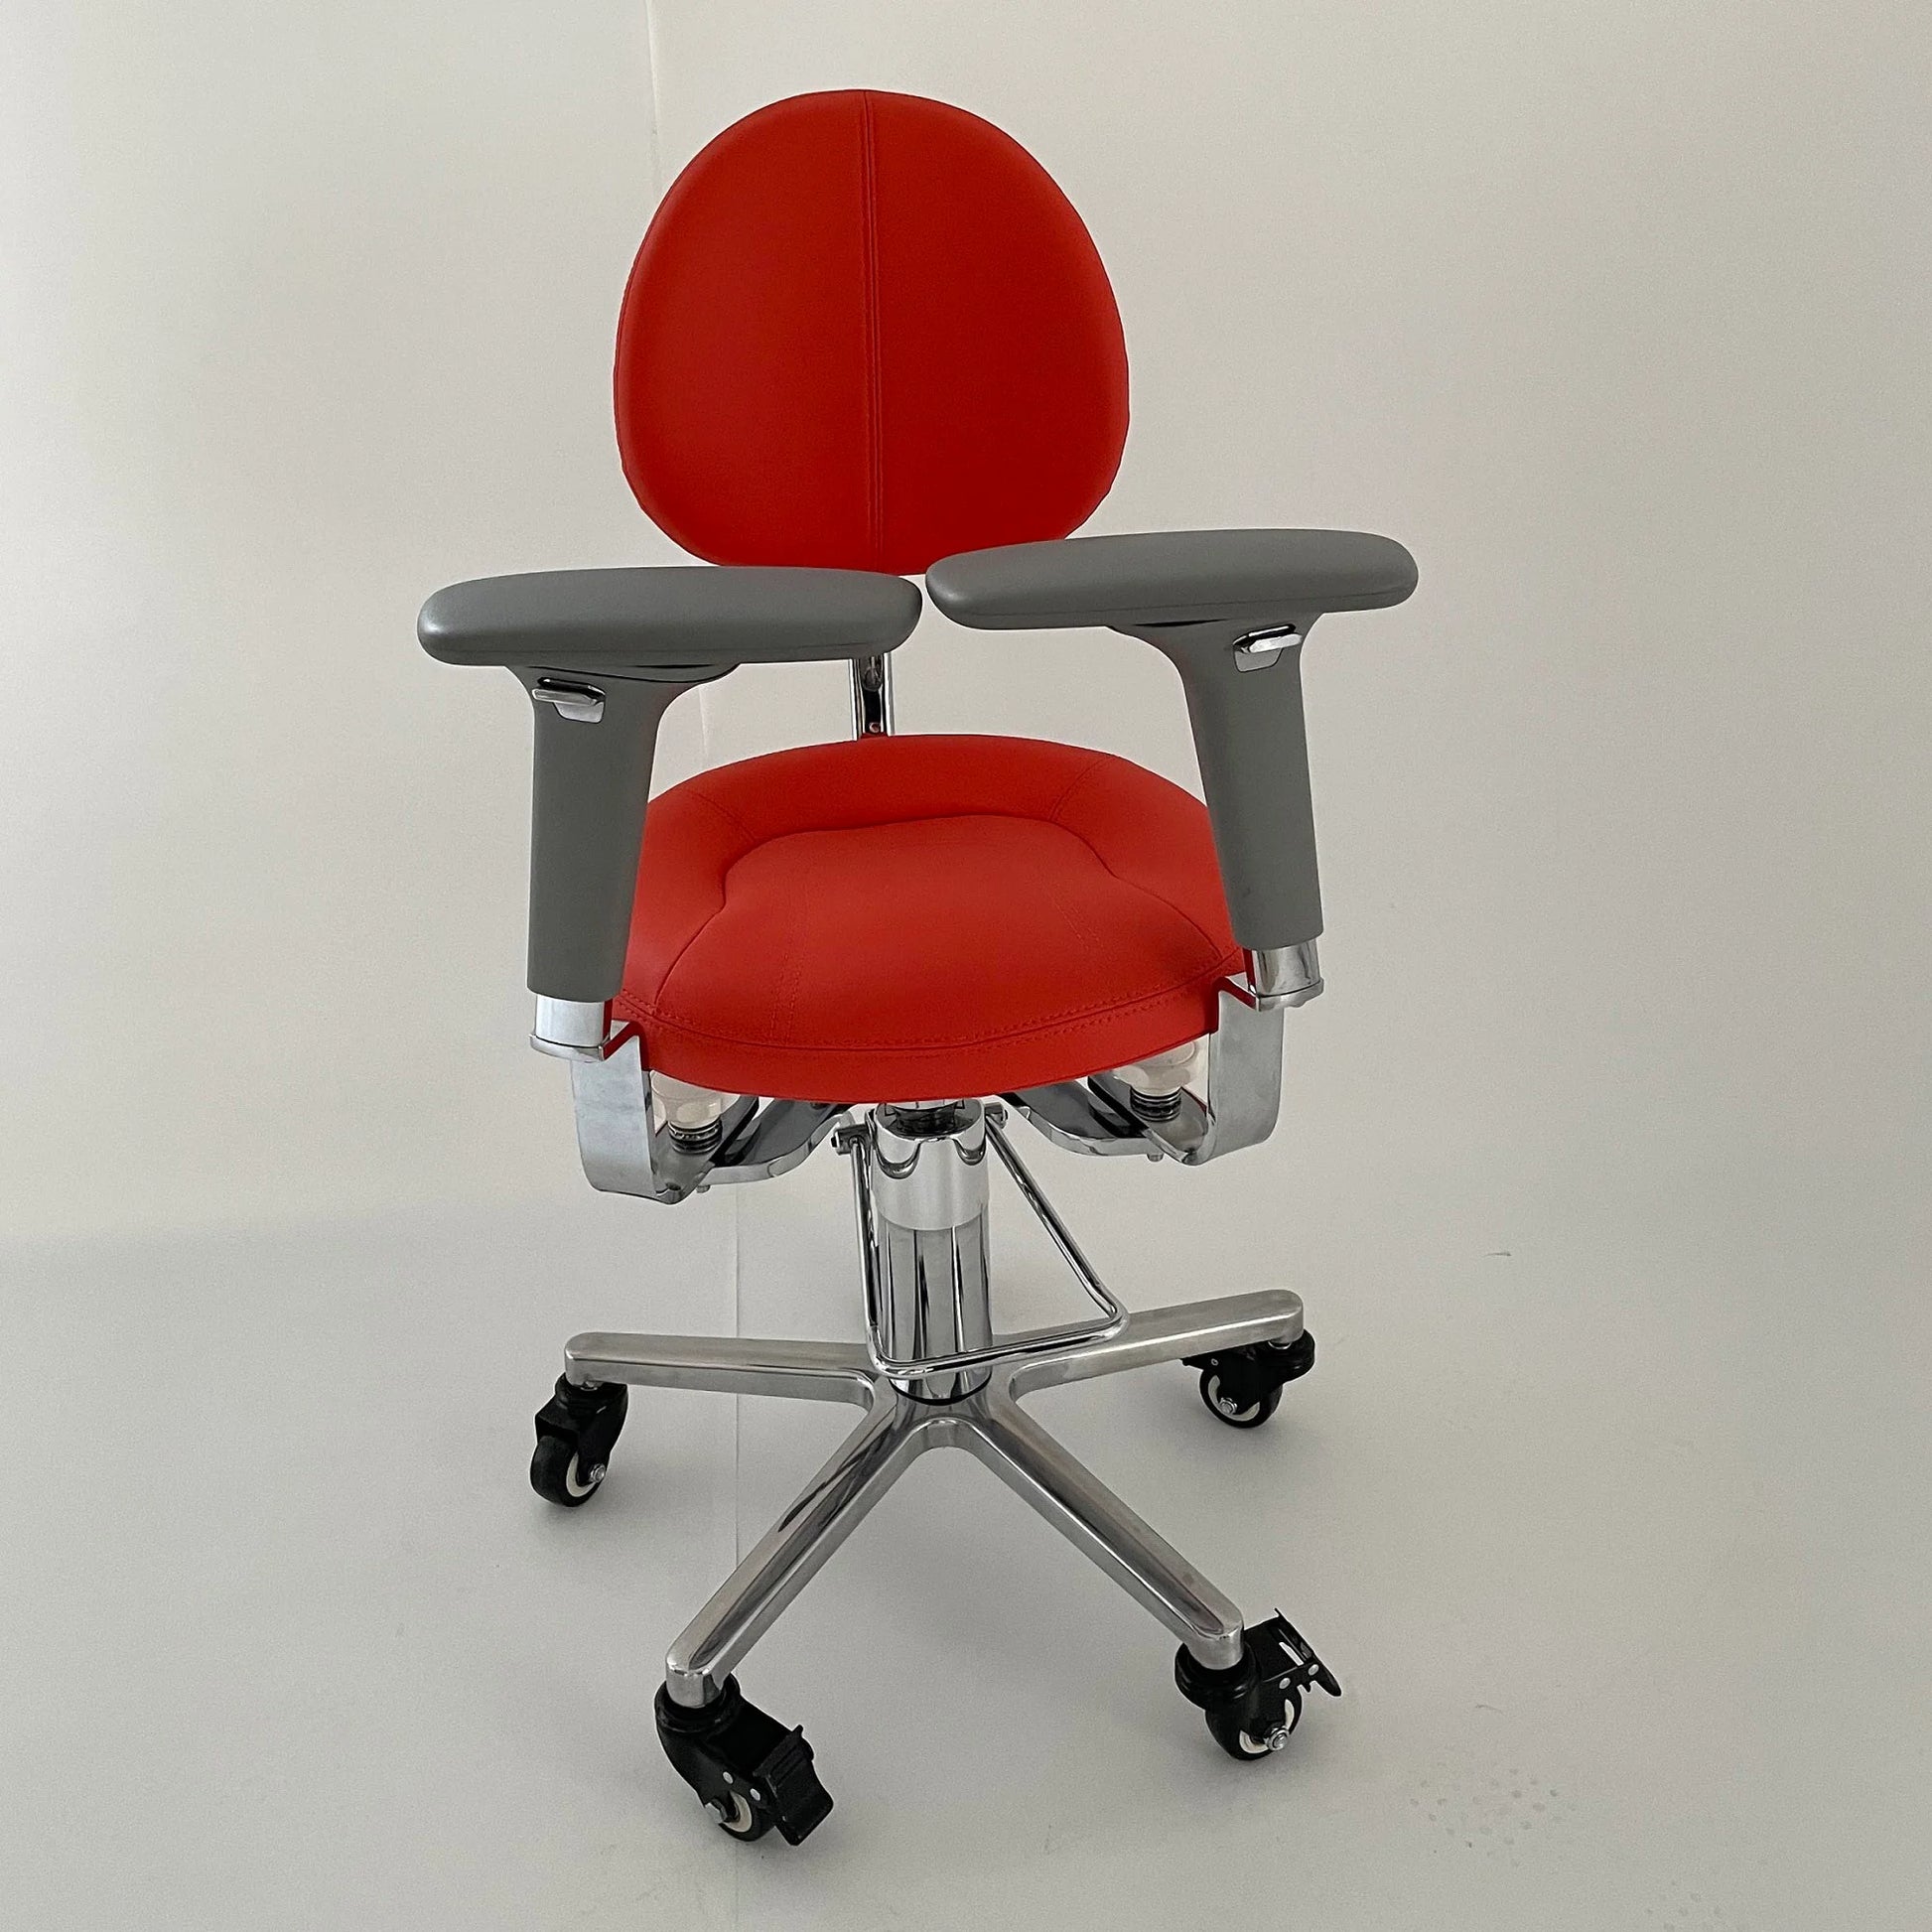 Hydraulic surgeon chair stool with hight quality grew swing armrest